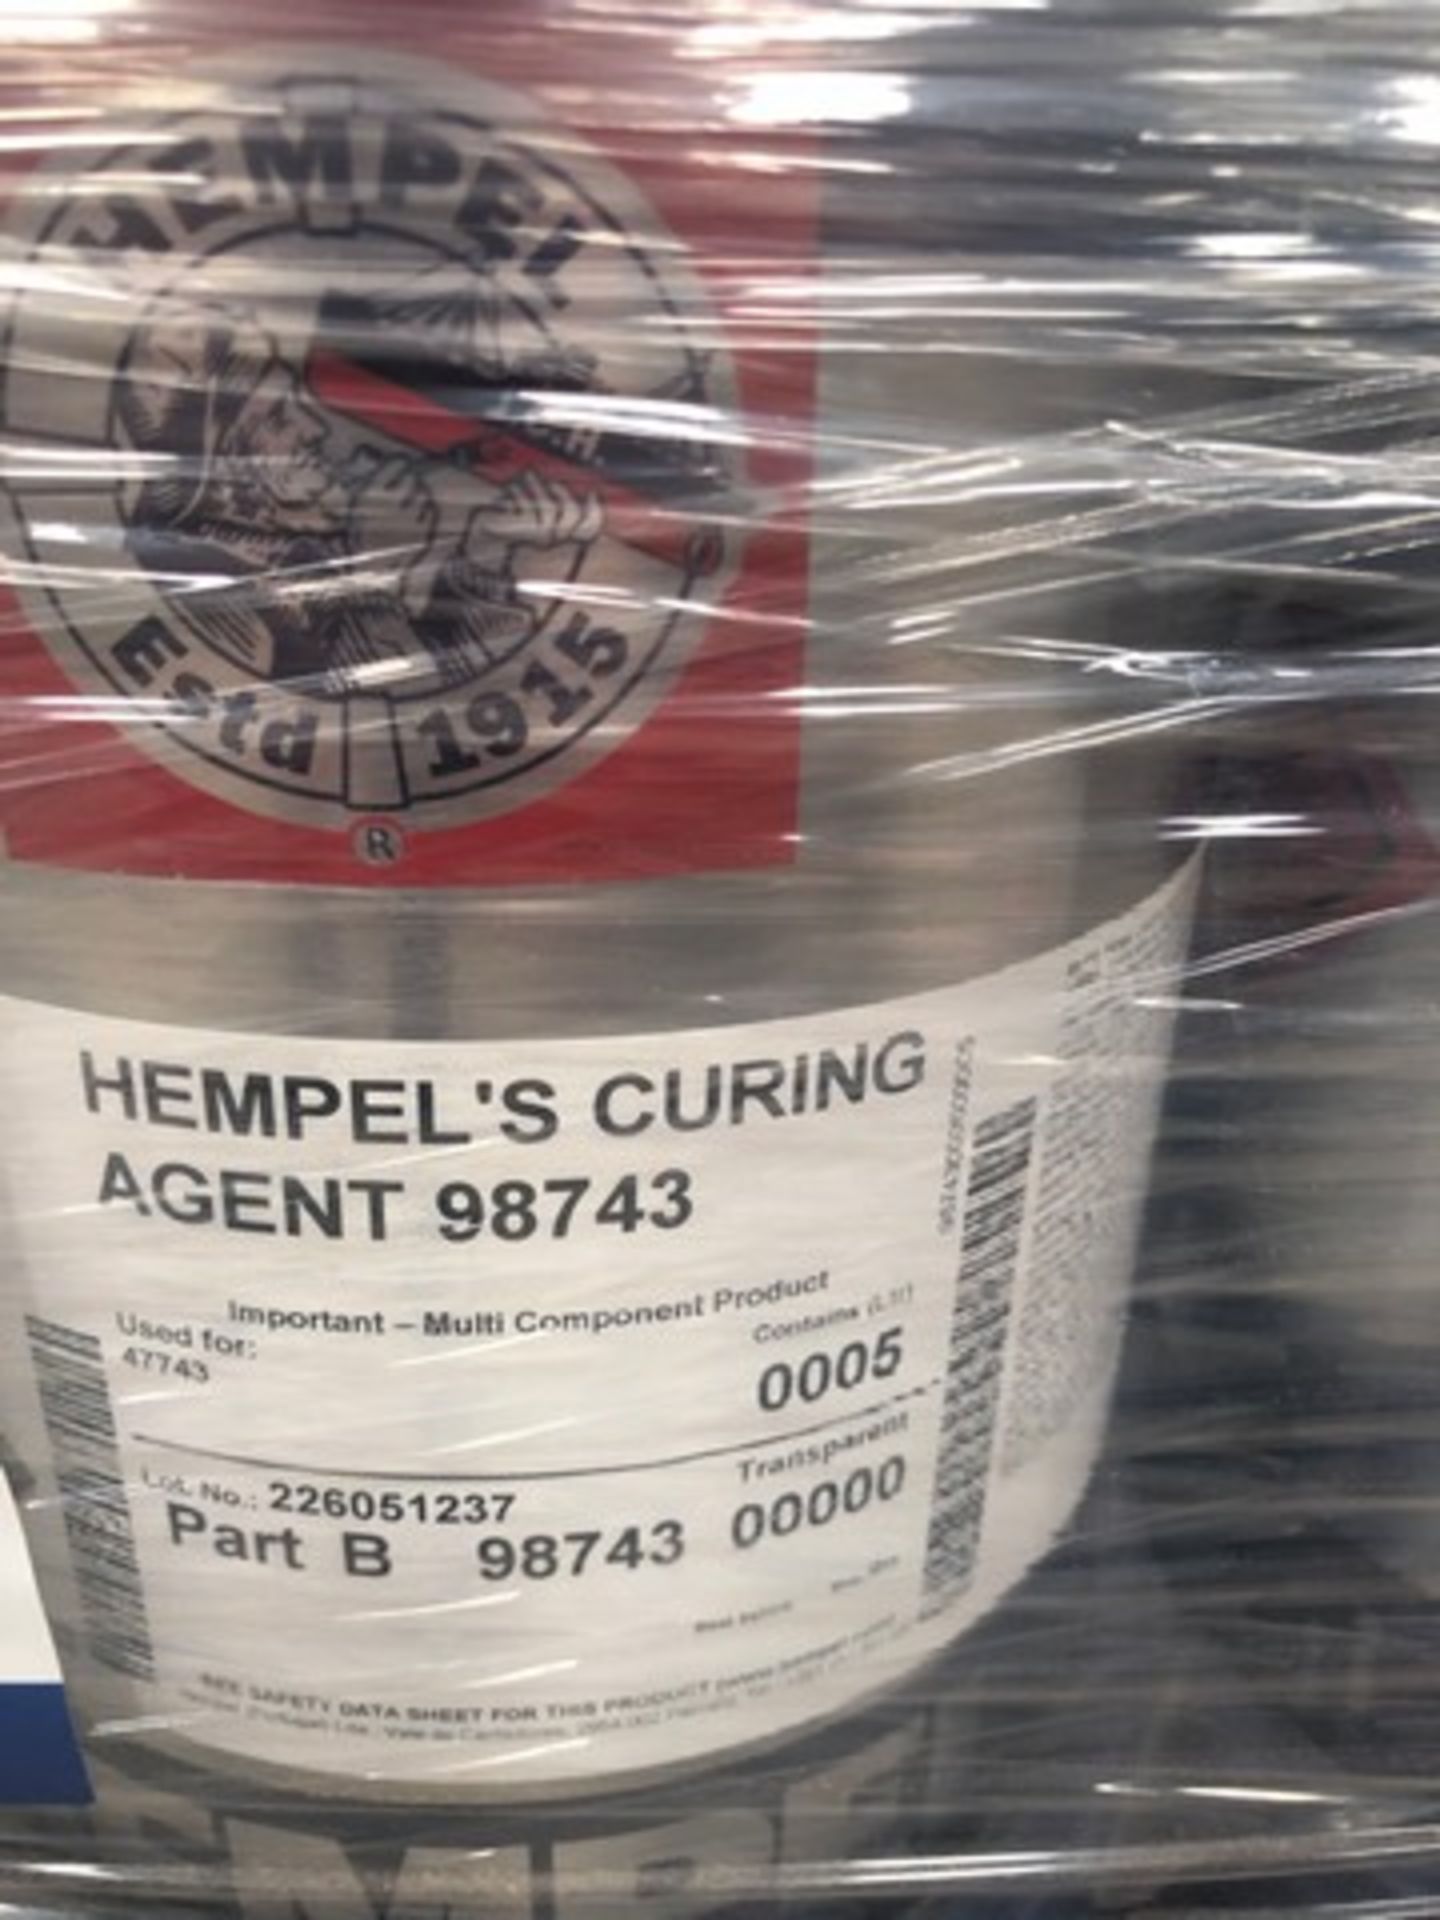 Pallet of Hempel curing agent 98743 approx 70 tins - Image 2 of 2